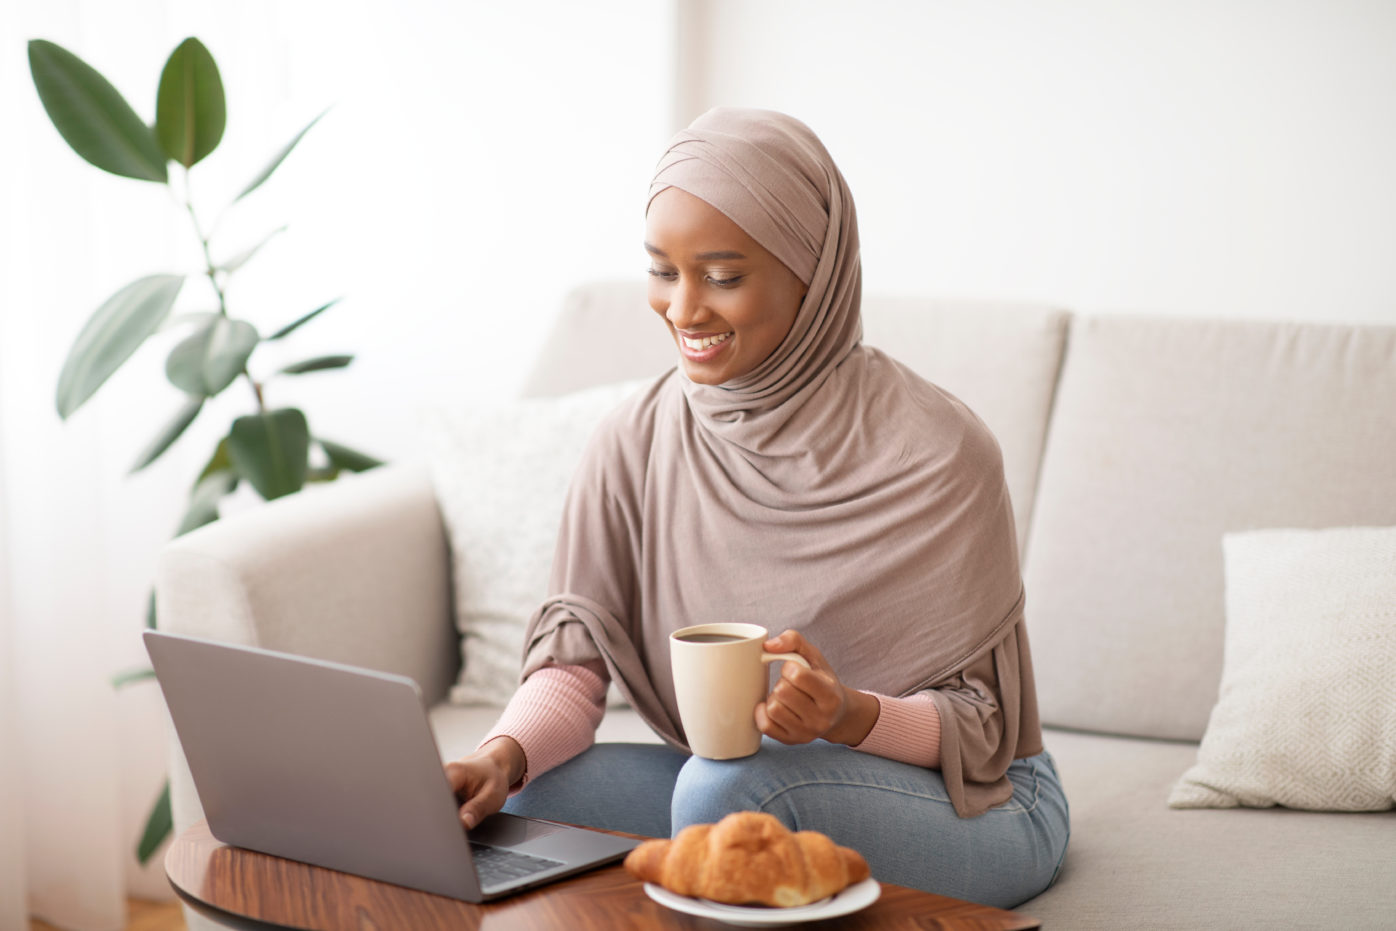 A female student wearing a hijab sits on a white couch while looking at a laptop on the coffee table in front of her. She is holding a mug in her left hand and is using the laptop with her right hand. There is a croissant on the coffee table and a green plant behind the couch.